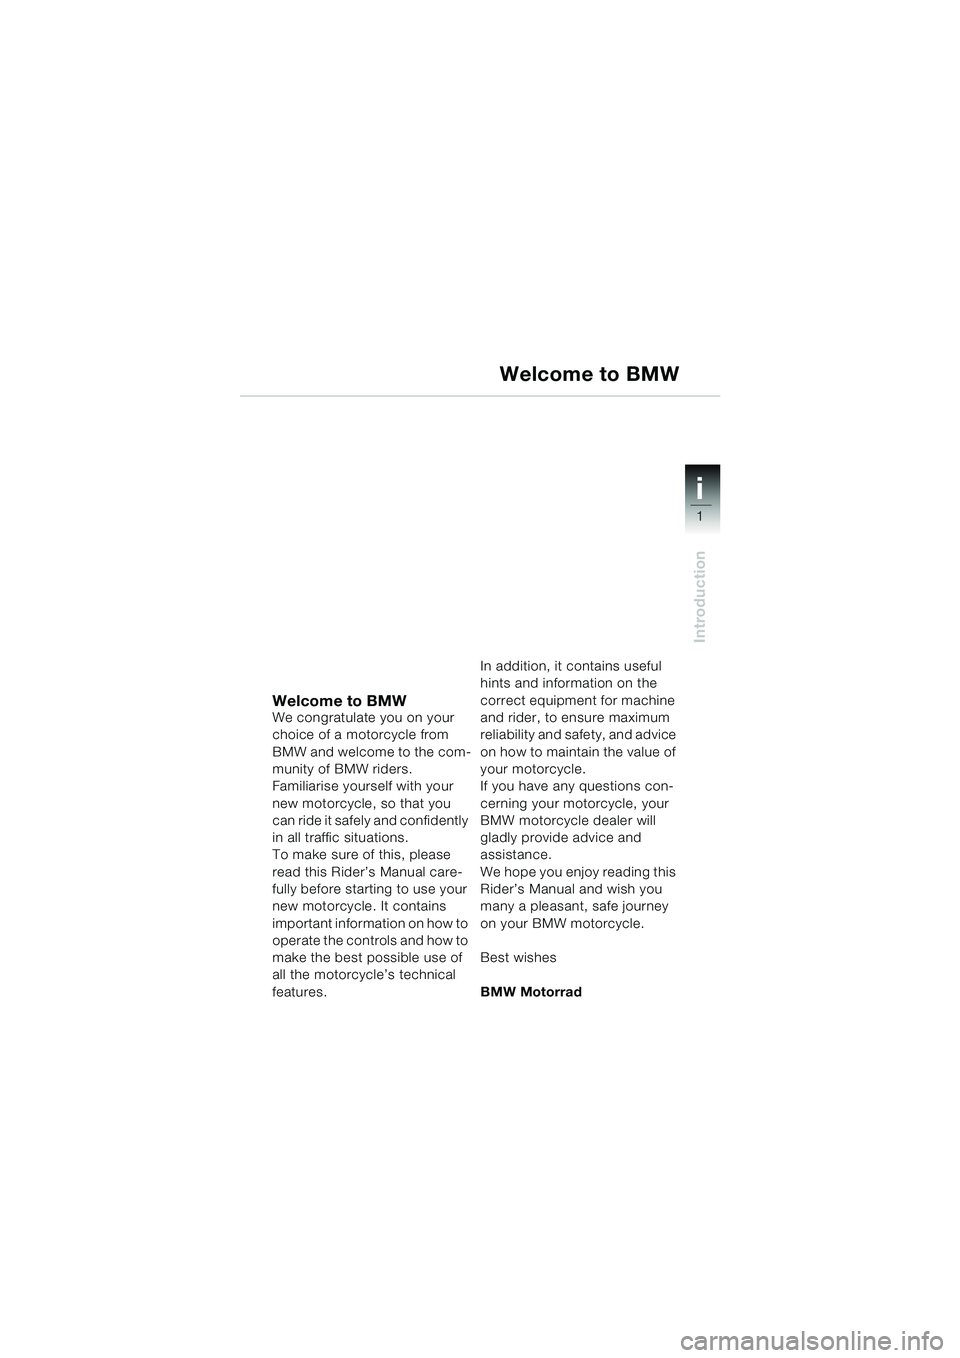 BMW MOTORRAD R 850 R 2004  Riders Manual (in English) 1
Introduction
i
Welcome to BMWWe congratulate you on your 
choice of a motorcycle from 
BMW and welcome to the com-
munity of BMW riders.
Familiarise yourself with your 
new motorcycle, so that you 
